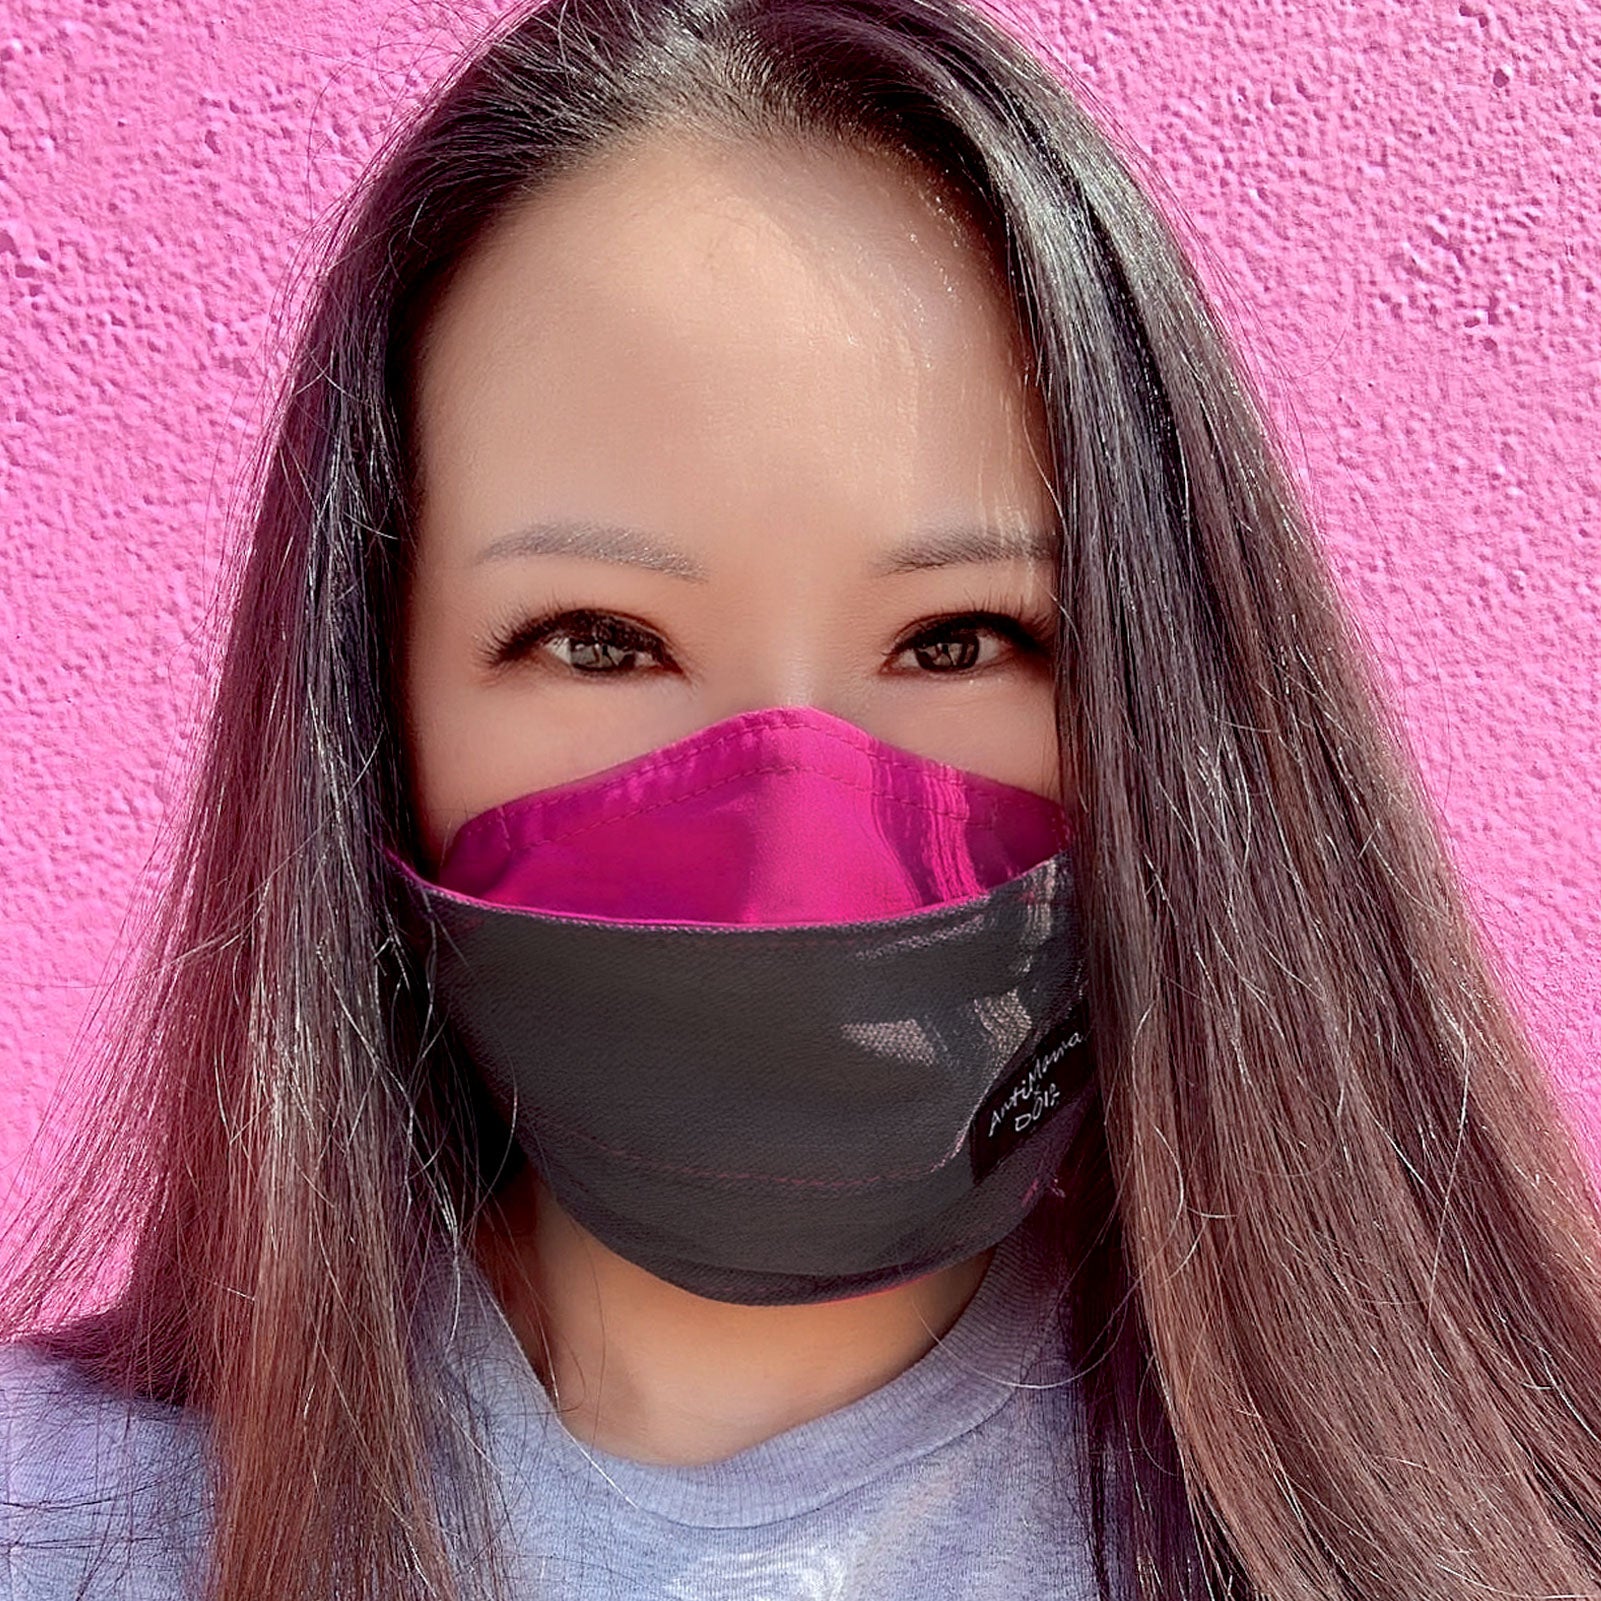 Origami Style Reusable Polyester Cloth Face Mask (Charcoal / Dark Pink)